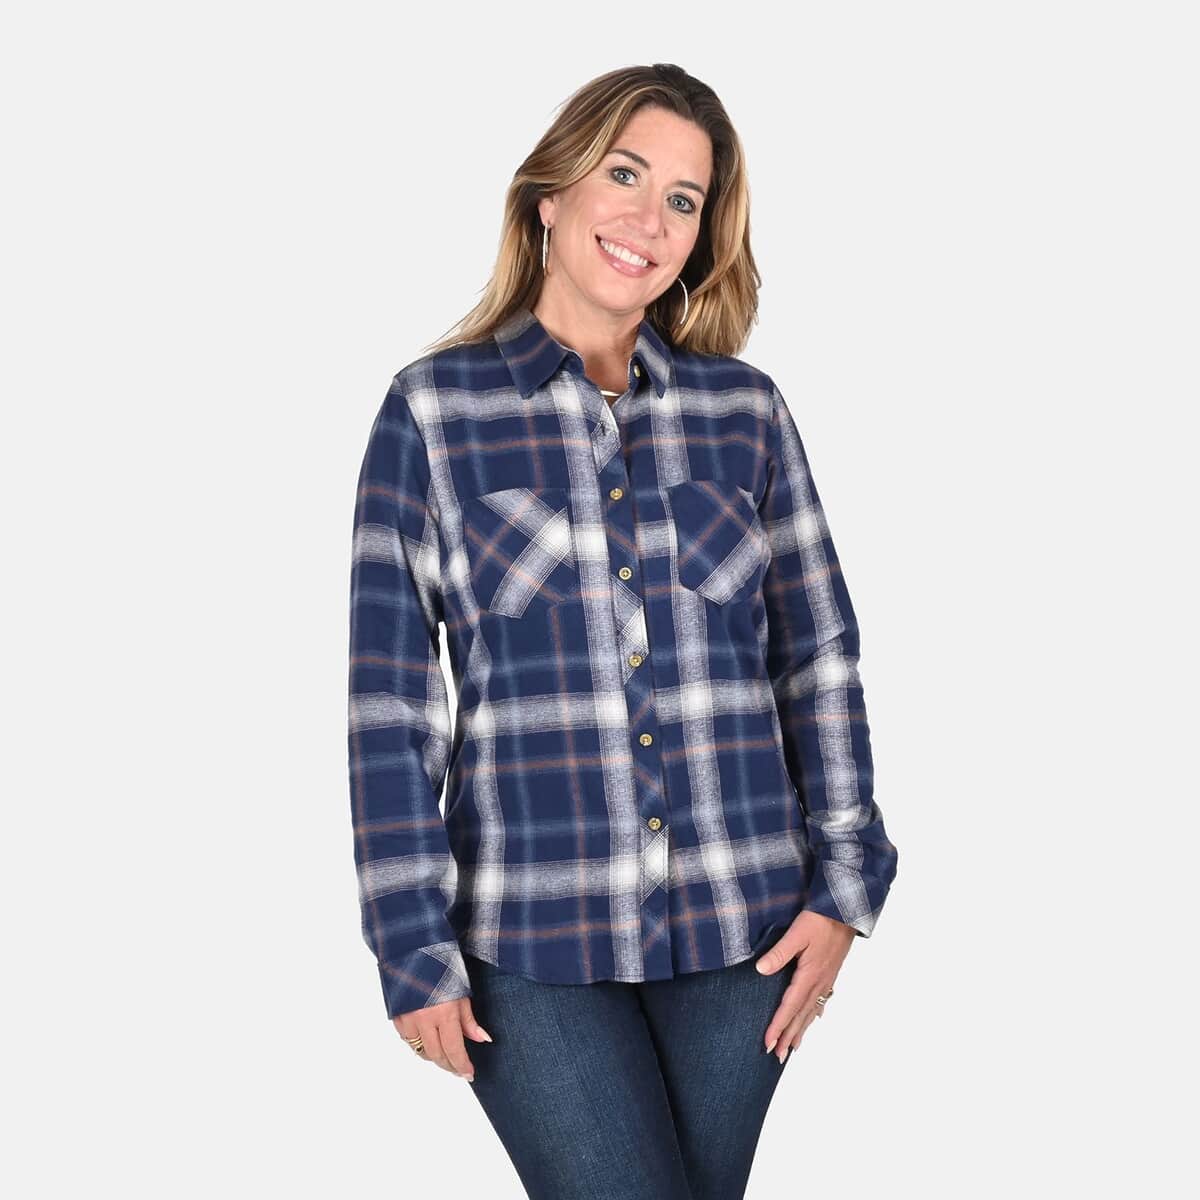 Victory Sportswear Blue and White Plaid Pattern Cotton Flannel Shirt - L image number 3